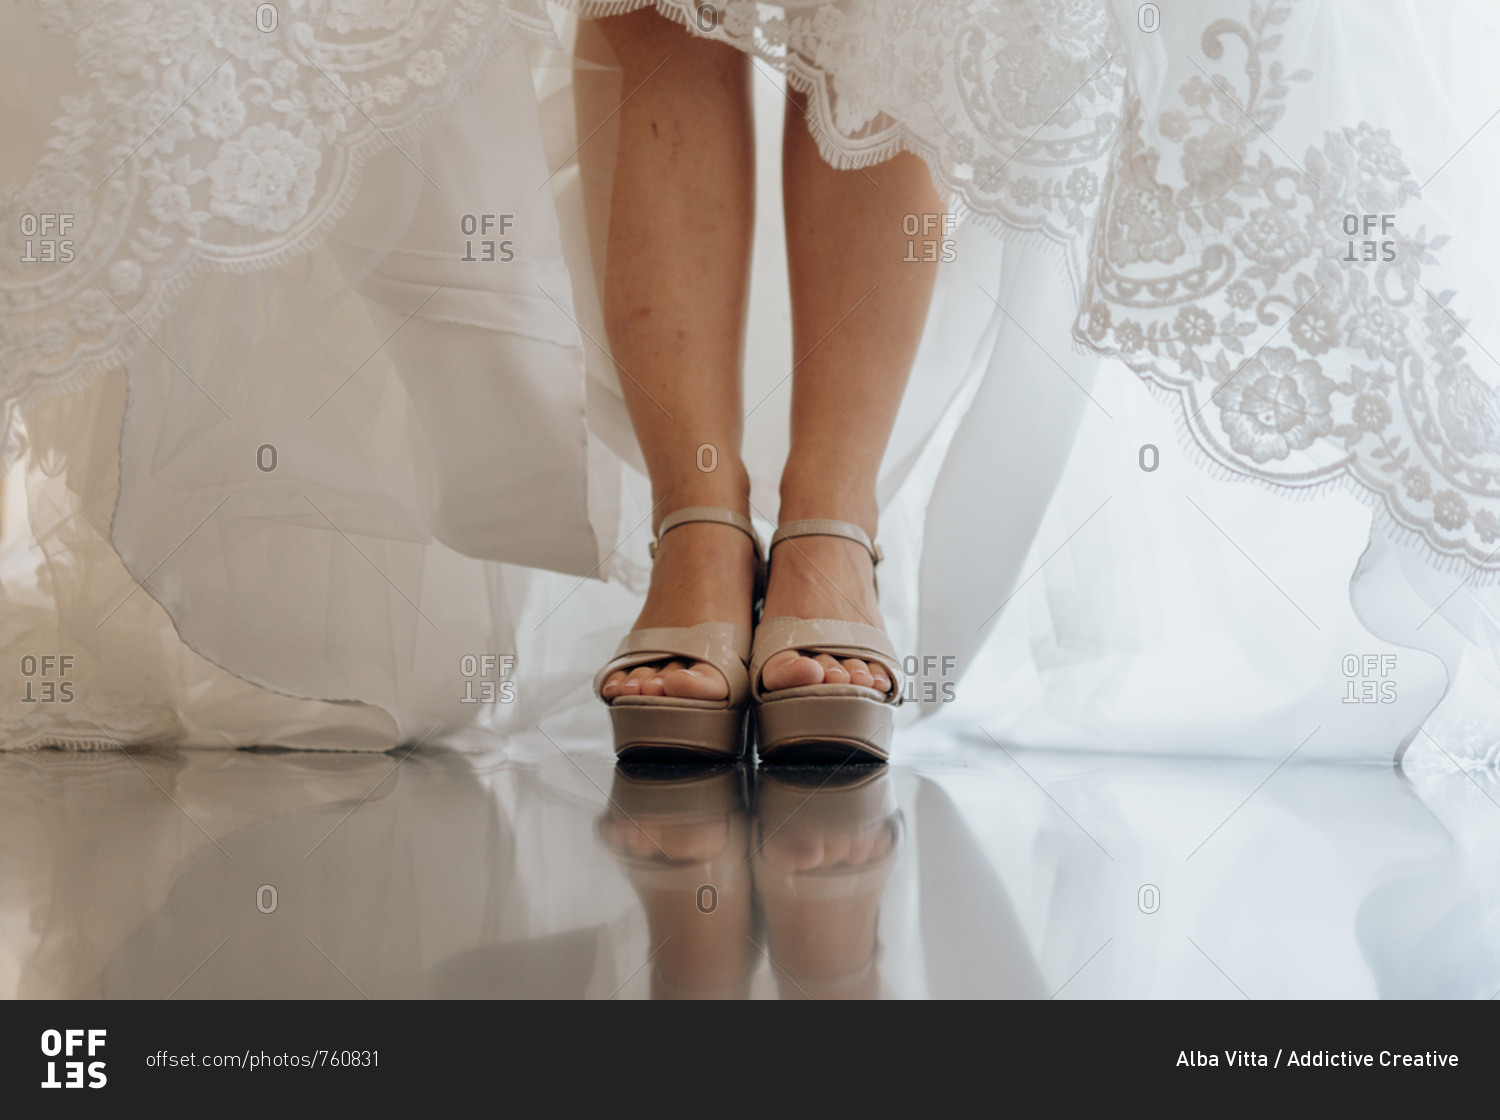 Crop shot of female legs in high heels and bridal white lace dress standing on shiny floor